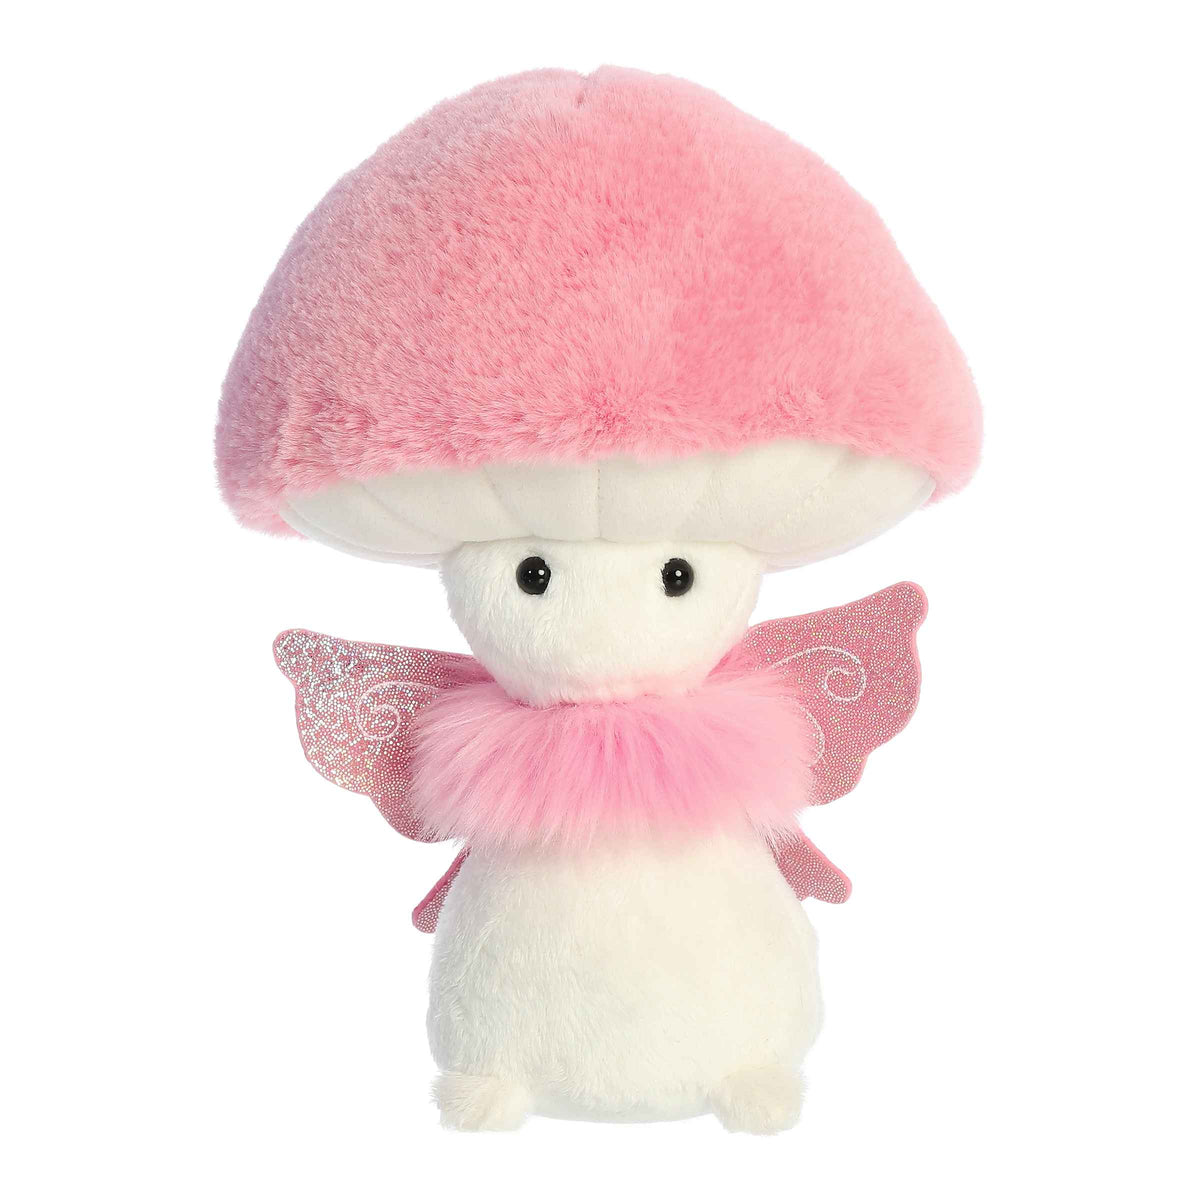 Pink Fairy plush from Fungi Friends, with a pink mushroom plush cap, sparkling eyes, and glistening wings